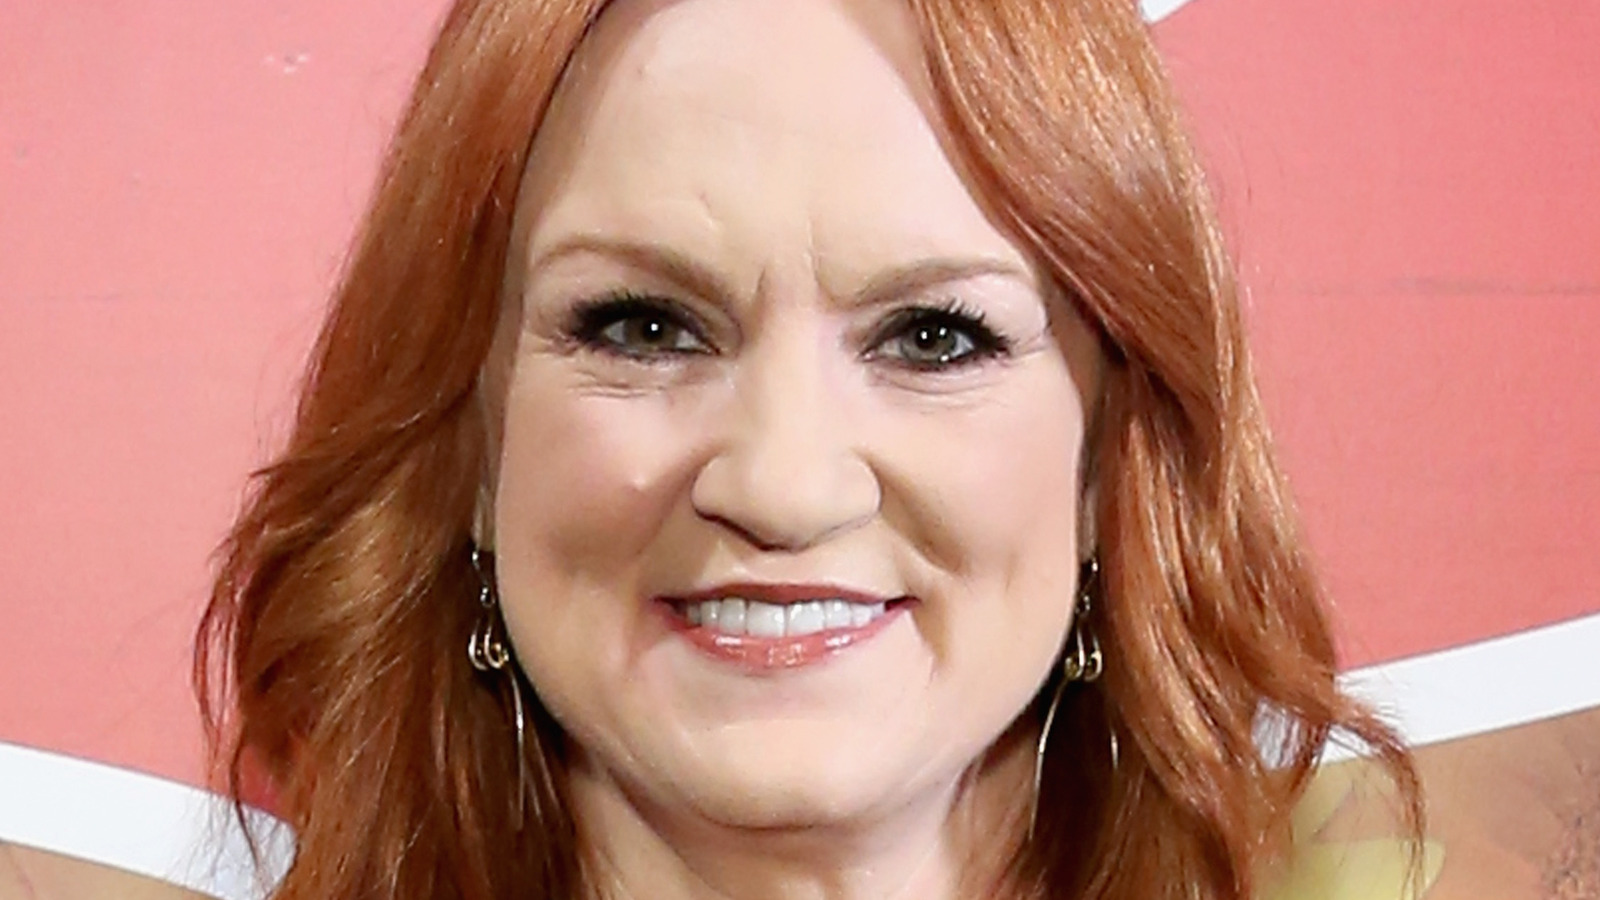 https://www.mashed.com/img/gallery/ree-drummond-talks-big-bad-budget-battle-cowboy-cooking-and-more-exclusive-interview/l-intro-1660057486.jpg